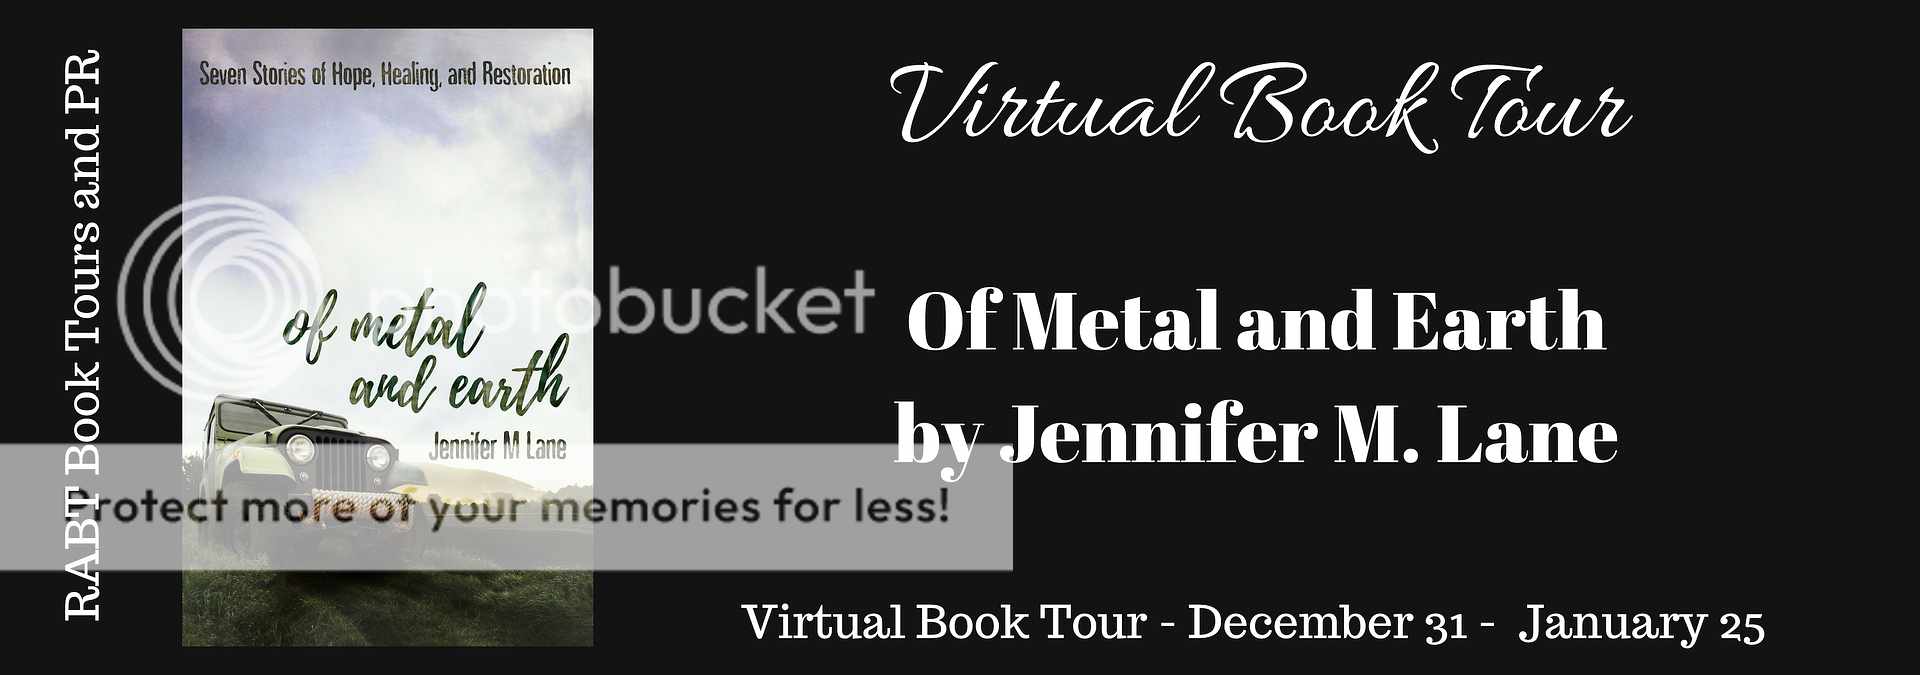 Virtual Book Tour: Of Metal and Earth by Jennifer M. Lane @Metal_and_Earth with an #interview of the #fiction book @RABTBookTours